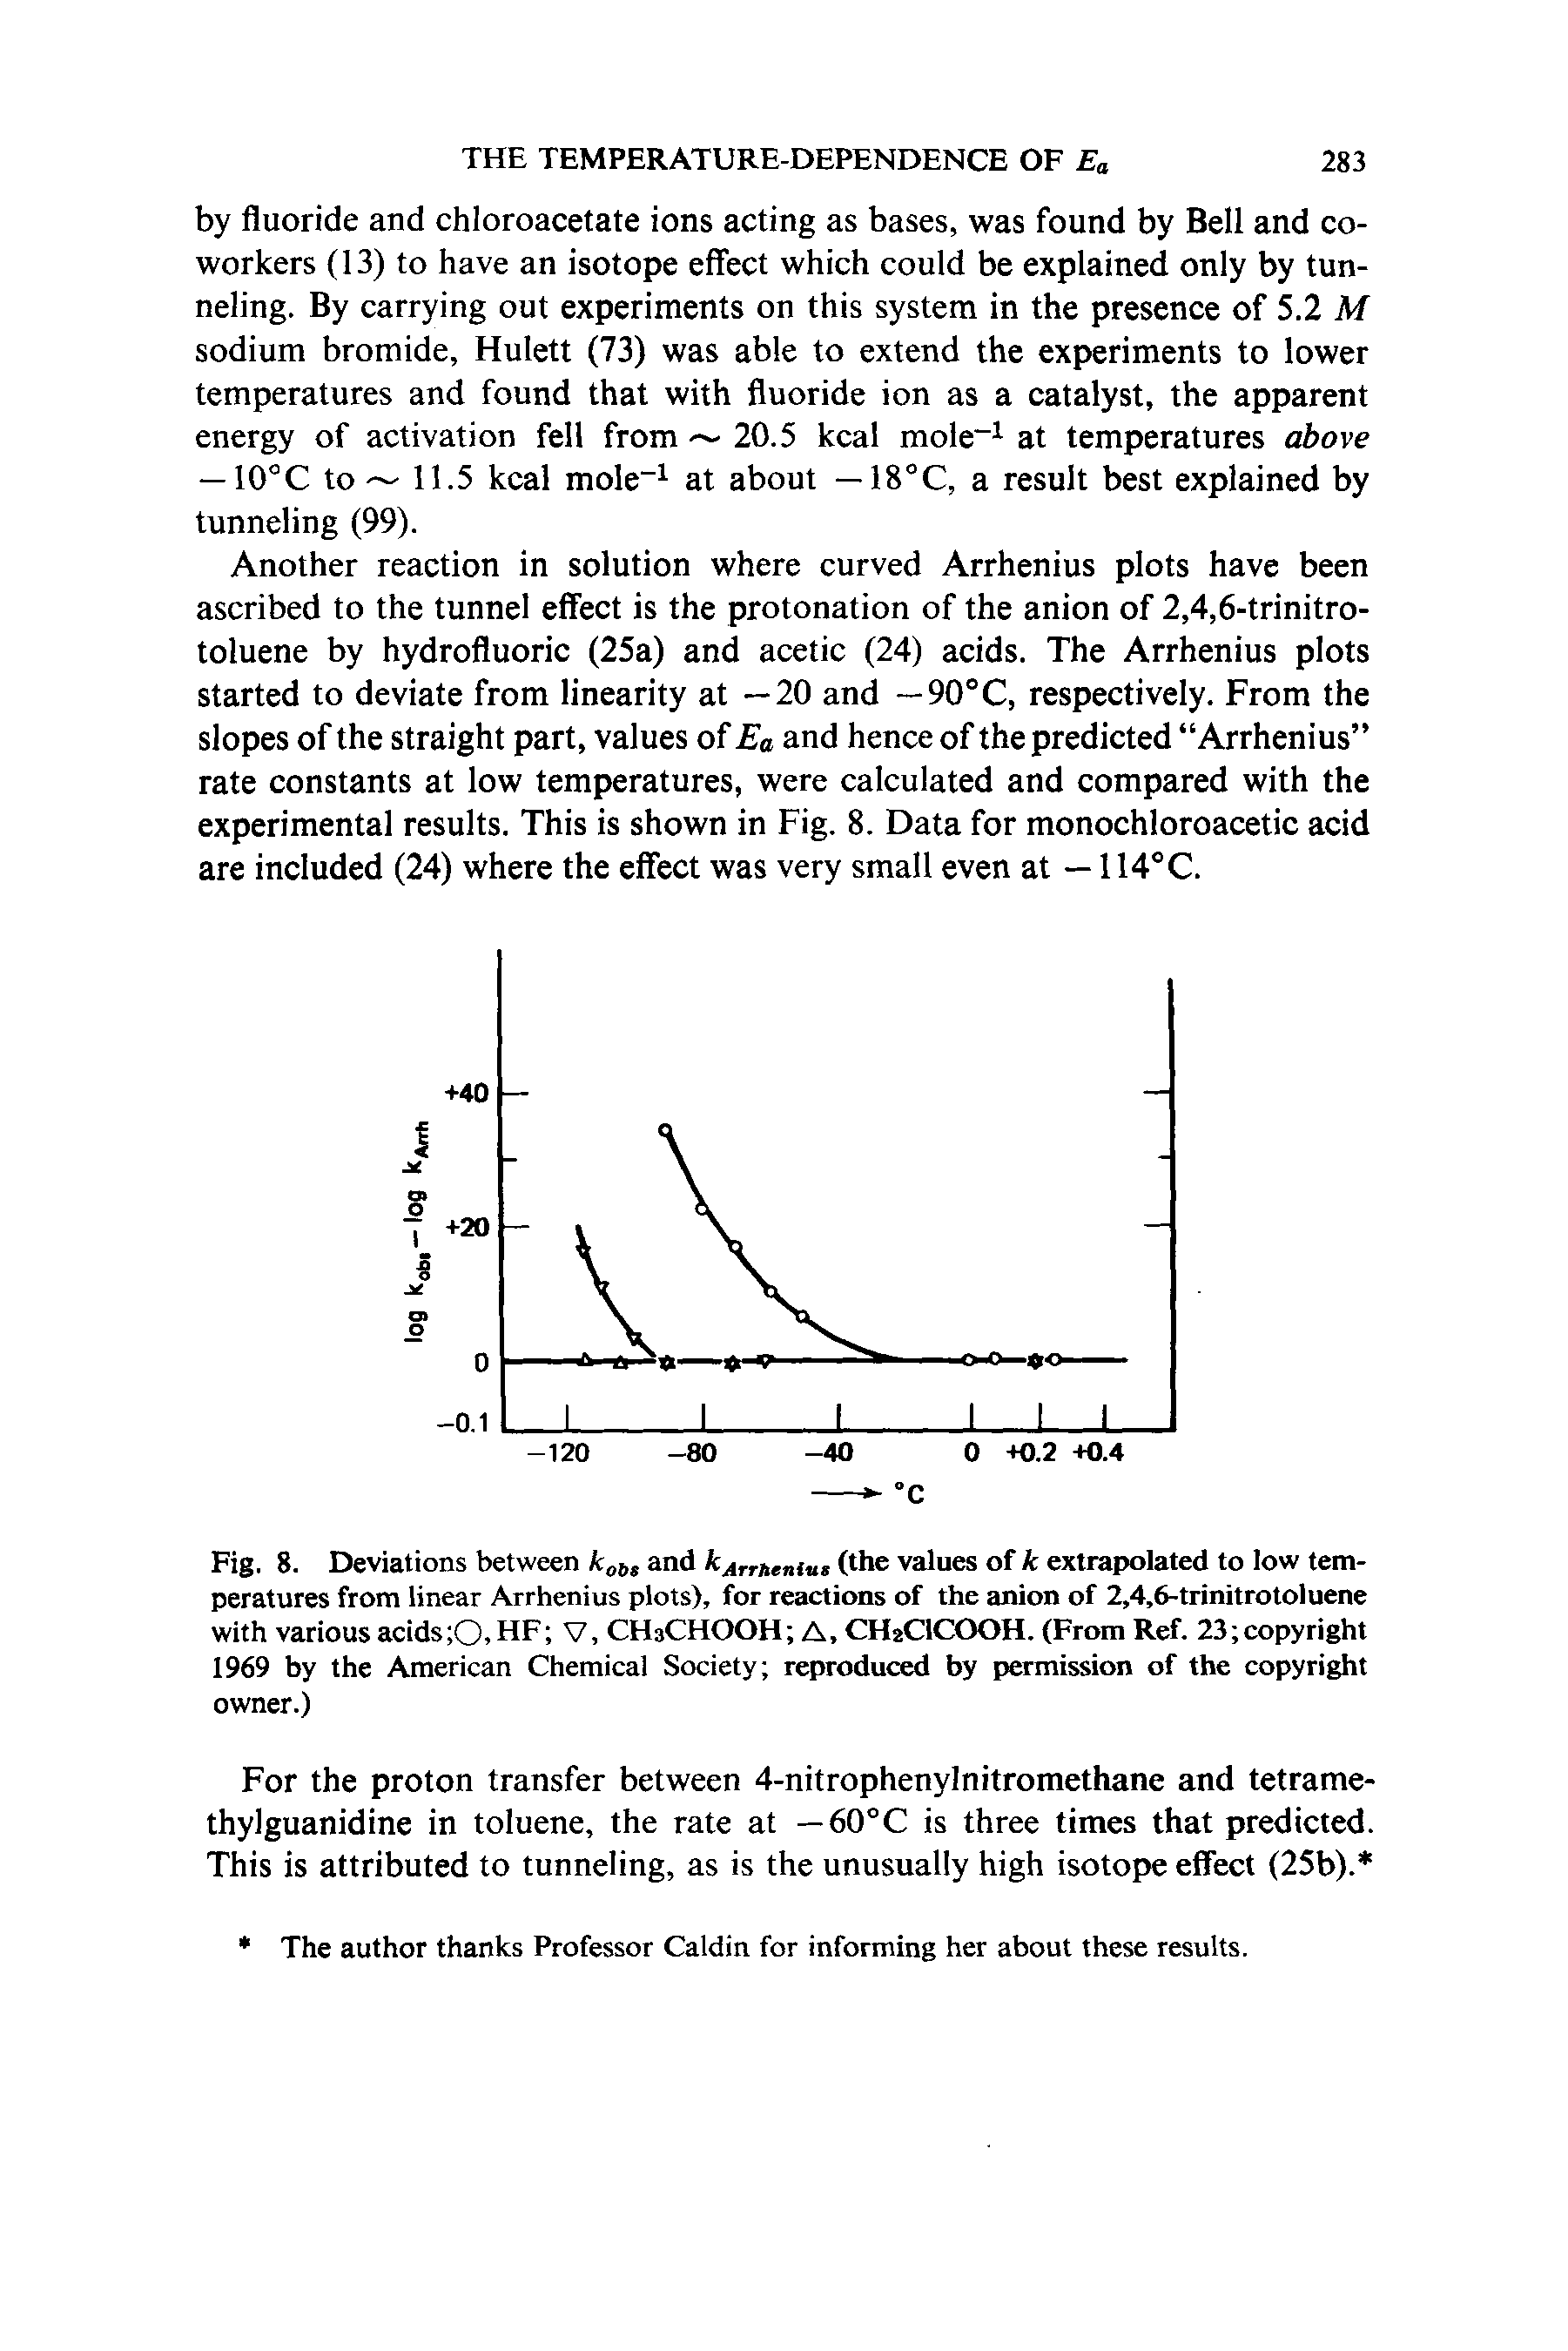 Fig. 8. Deviations between and k rrheniun (the values of k extrapolated to low temperatures from linear Arrhenius plots), for reactions of the anion of 2,4,6-trinitrotoluene with various acids 0,HF V, CHsCHOOH A, CH2CICOOH. (From Ref. 23 copyright 1969 by the American Chemical Society reproduced by permission of the copyright owner.)...